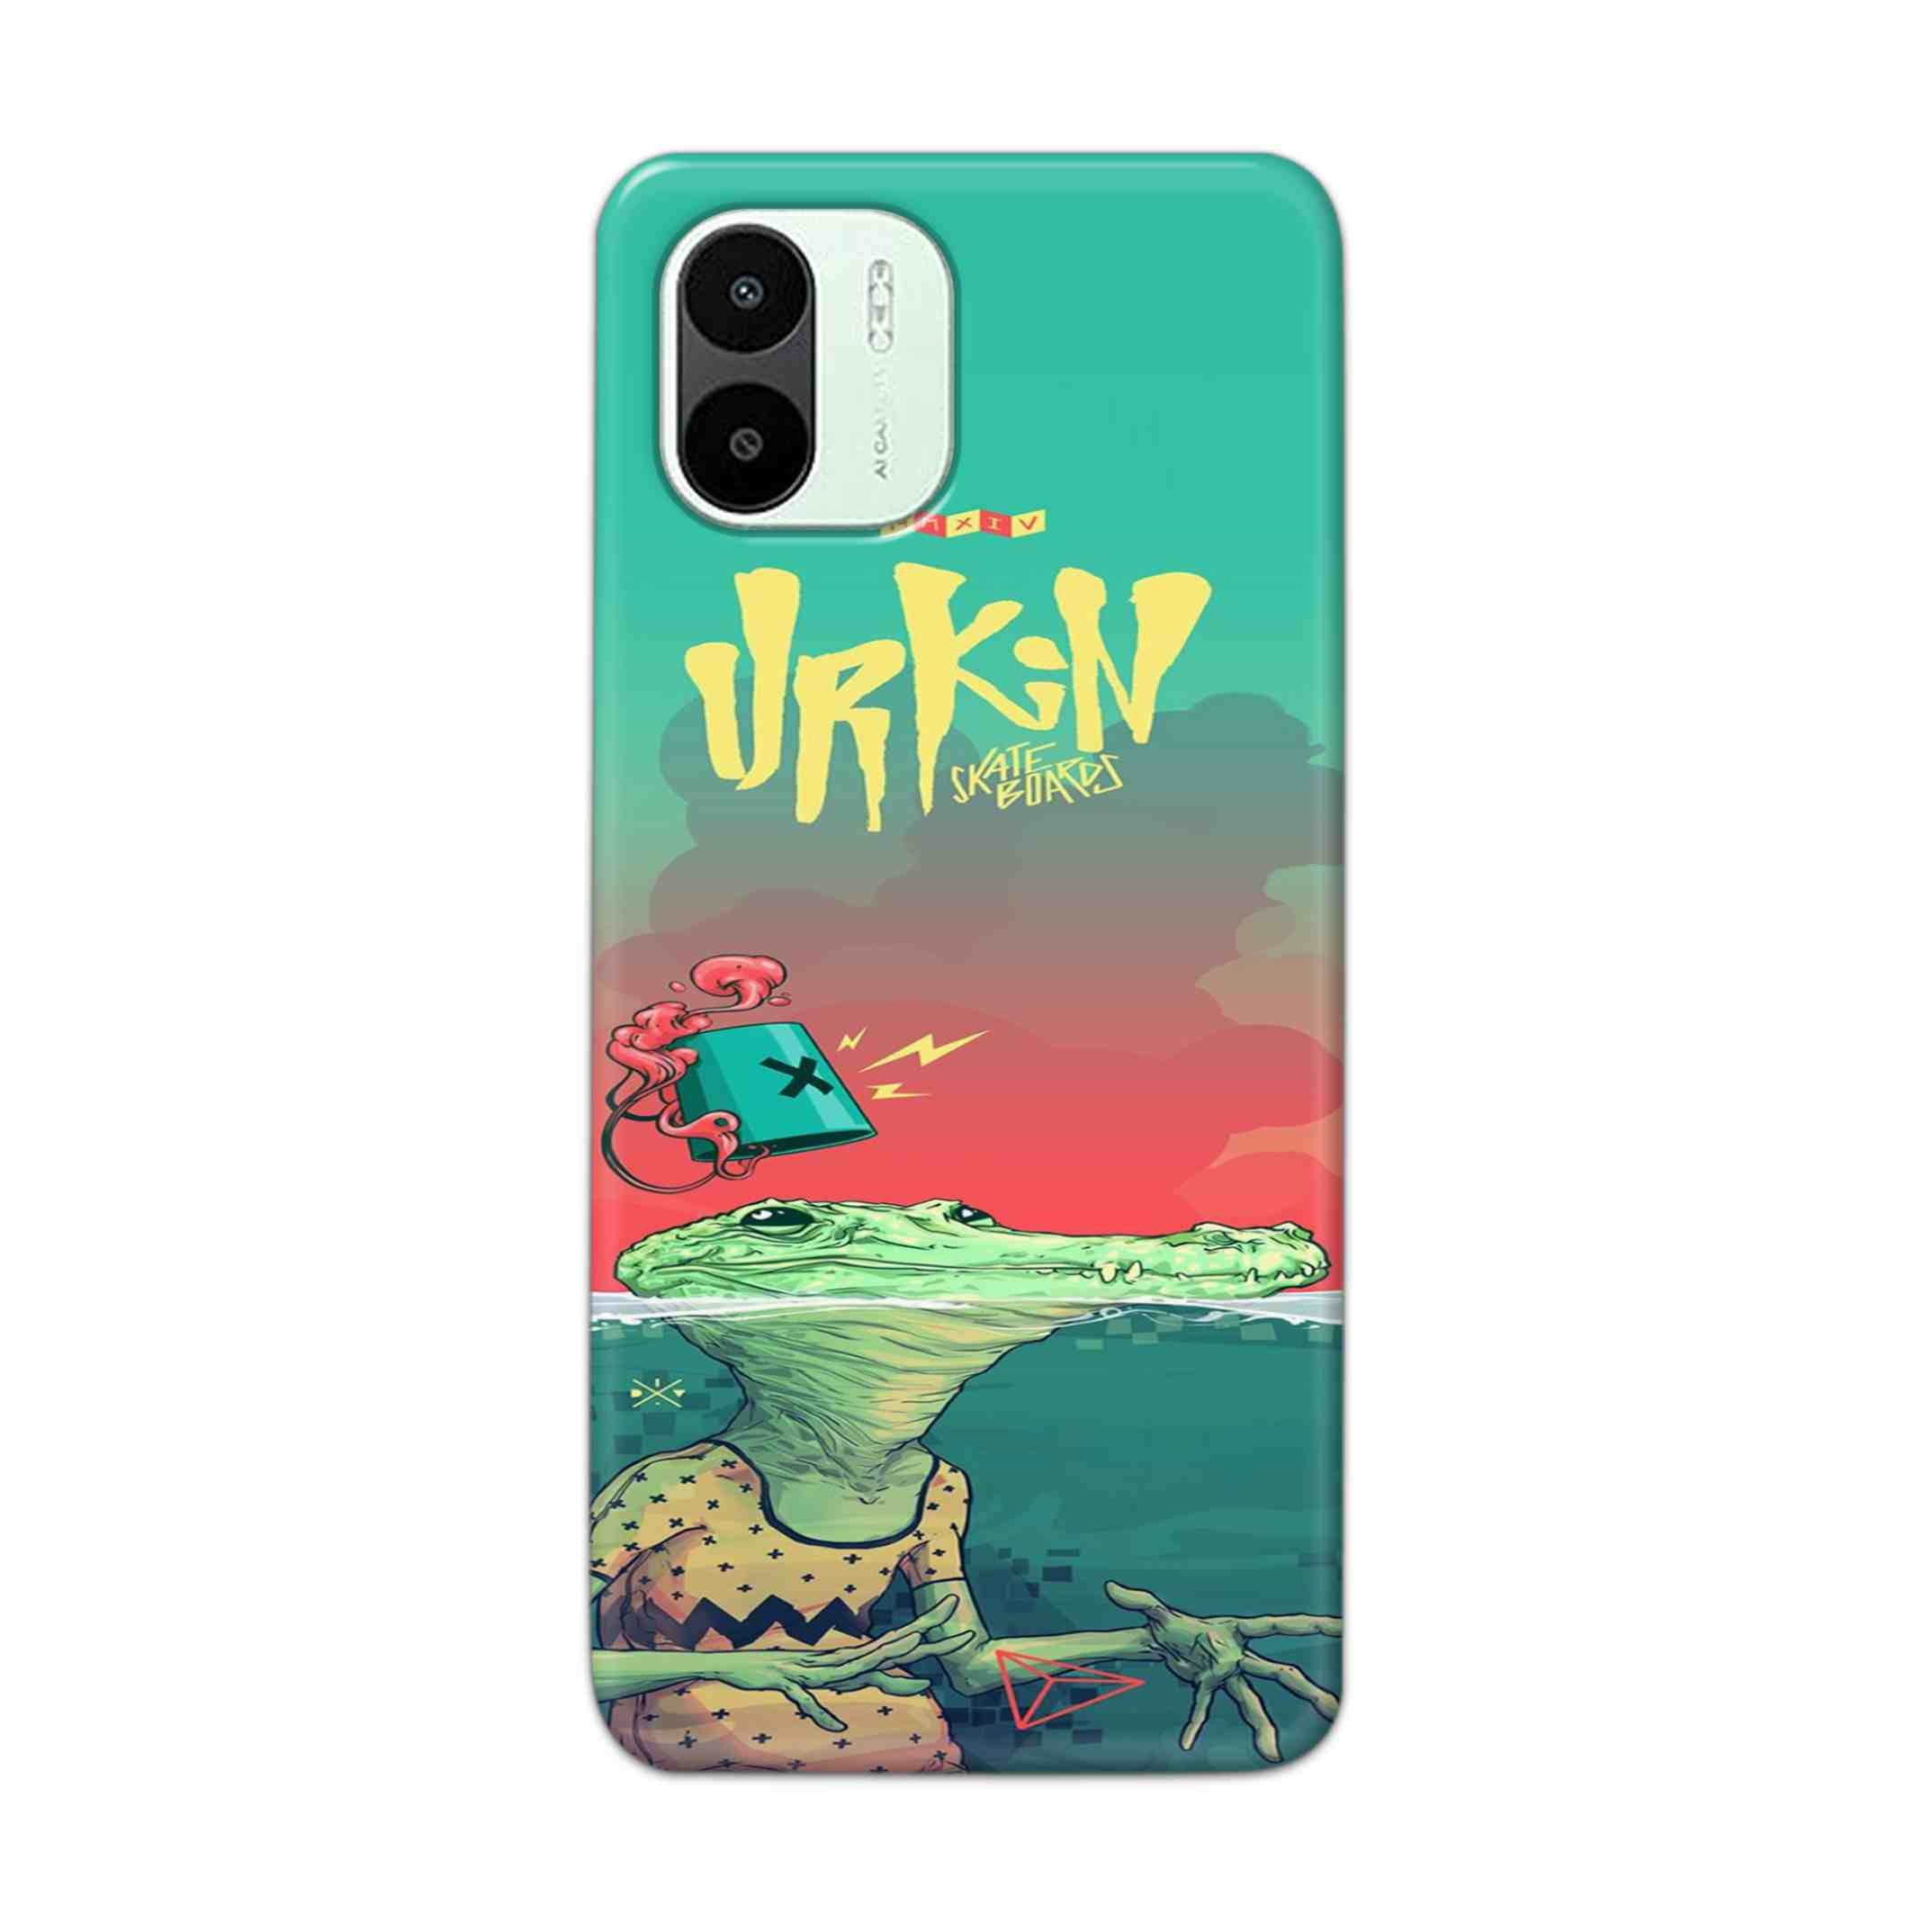 Buy Urkin Hard Back Mobile Phone Case Cover For Xiaomi Redmi A1 5G Online